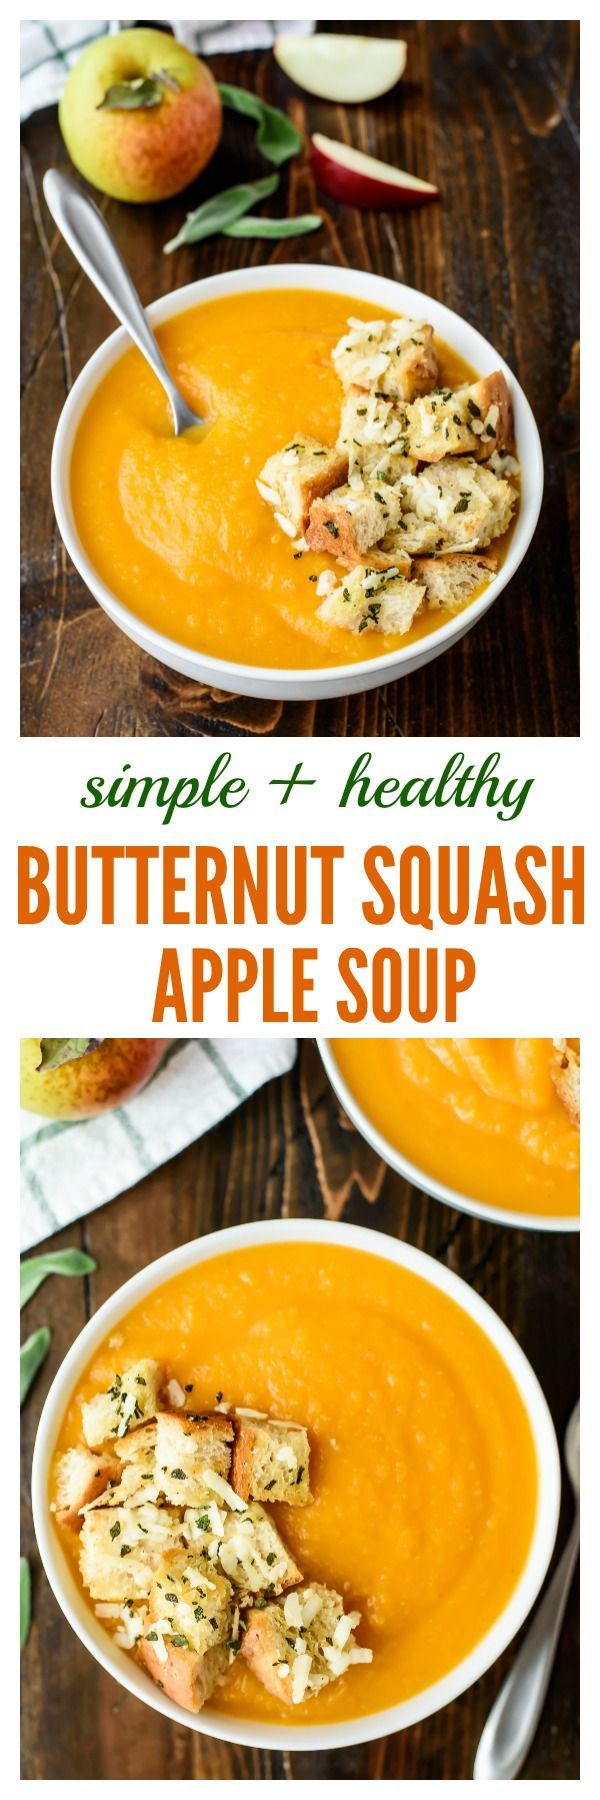 two bowls filled with butternut squash soup on top of a wooden table next to an apple